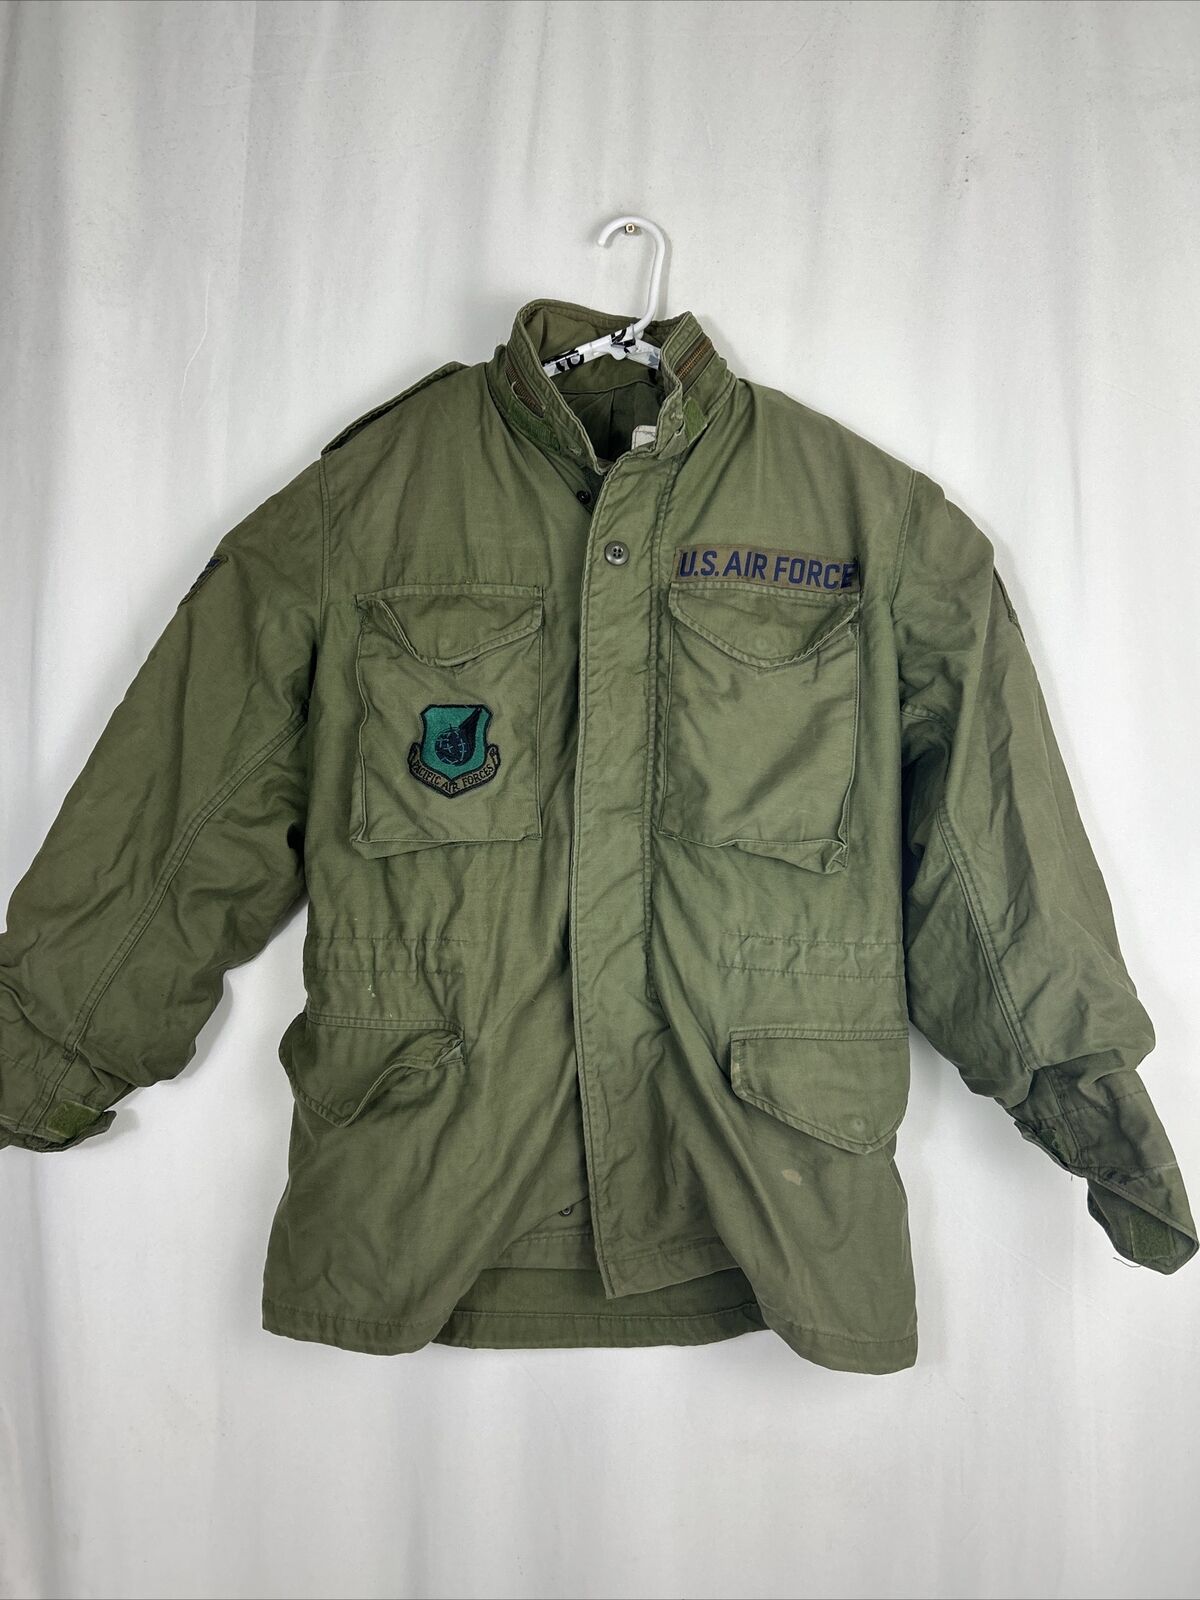 USAF Air Force Prime Beef M65 Cold Weather Field Jacket 8415-00-782-2936 S Reg